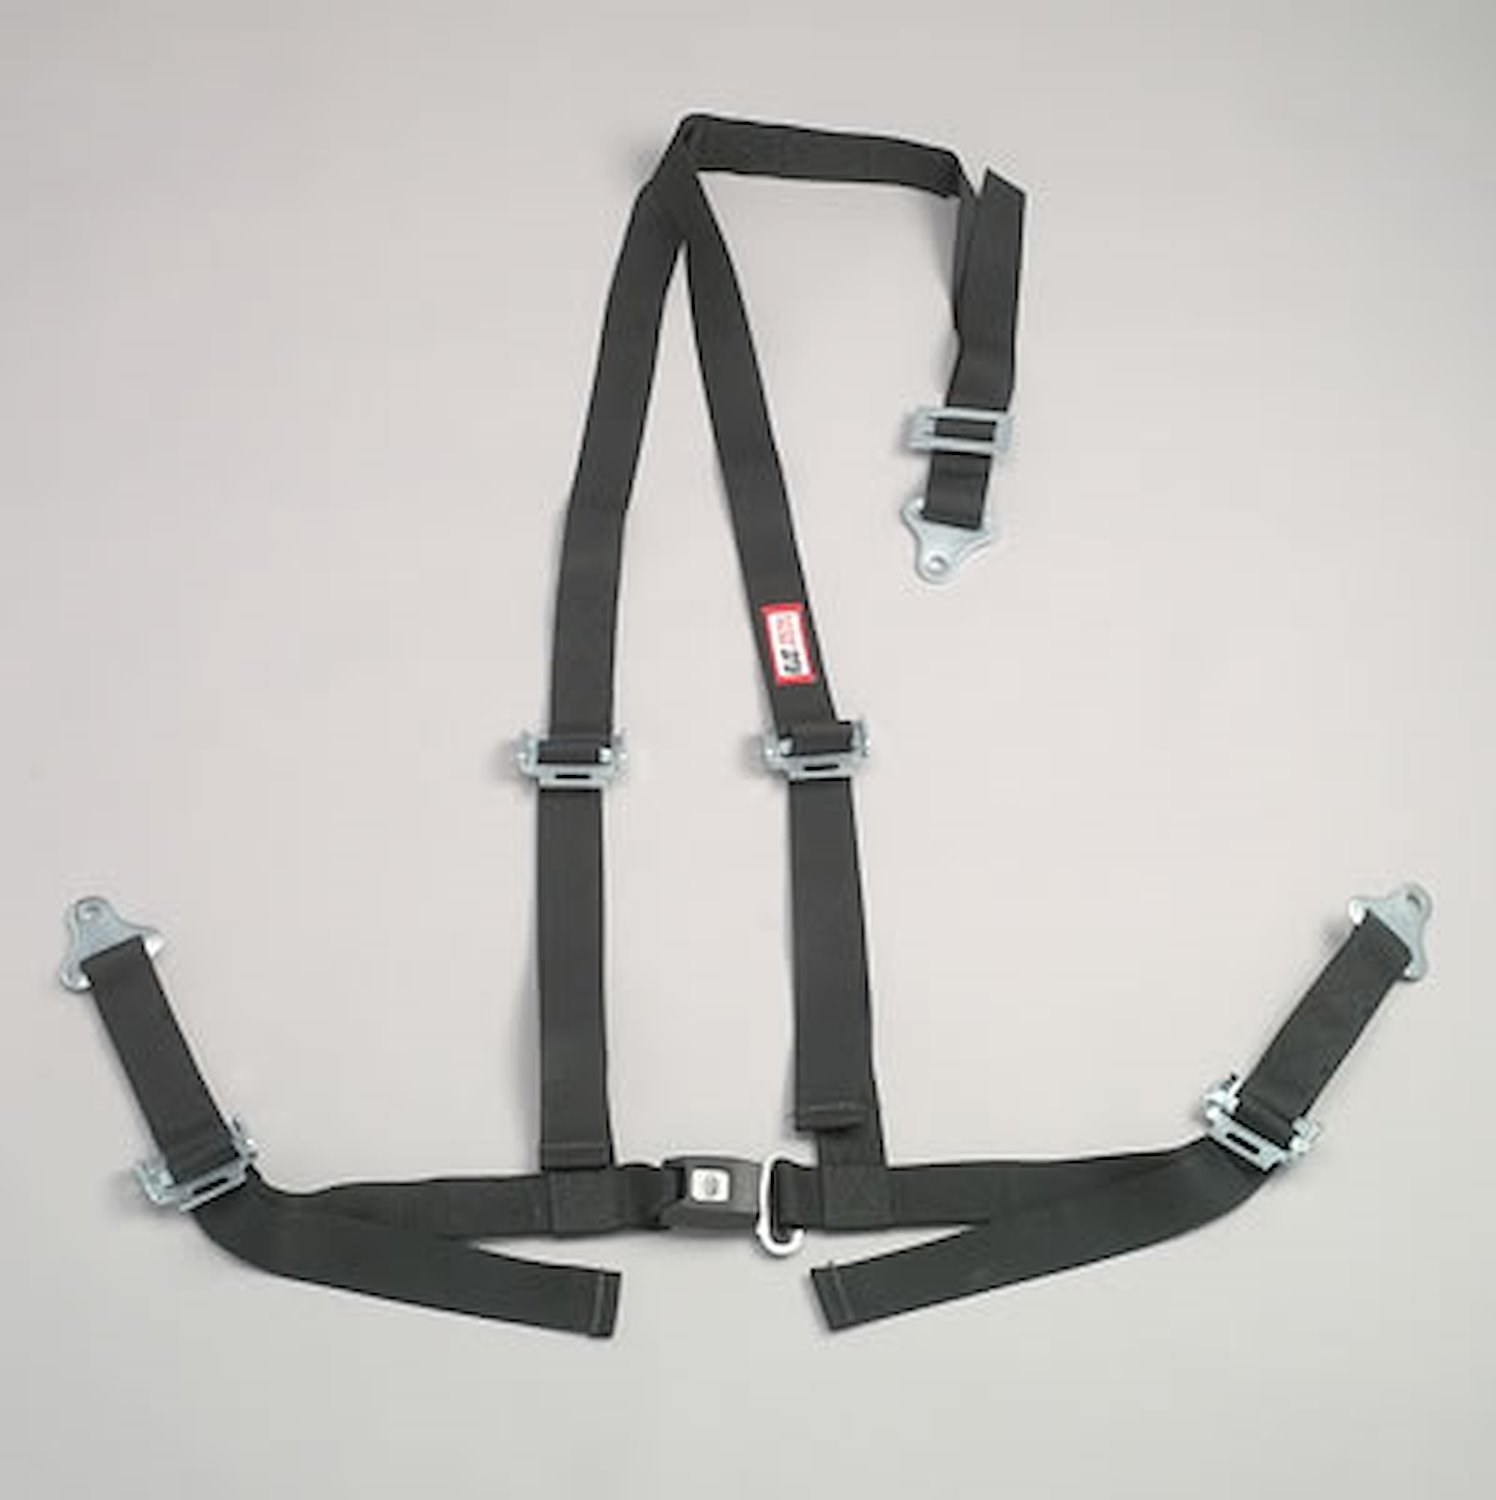 NON-SFI B&T HARNESS 2 PULL DOWN Lap Belt 2 S.H. INDIVIDUAL FLOOR Mount ALL WRAP ENDS ORANGE